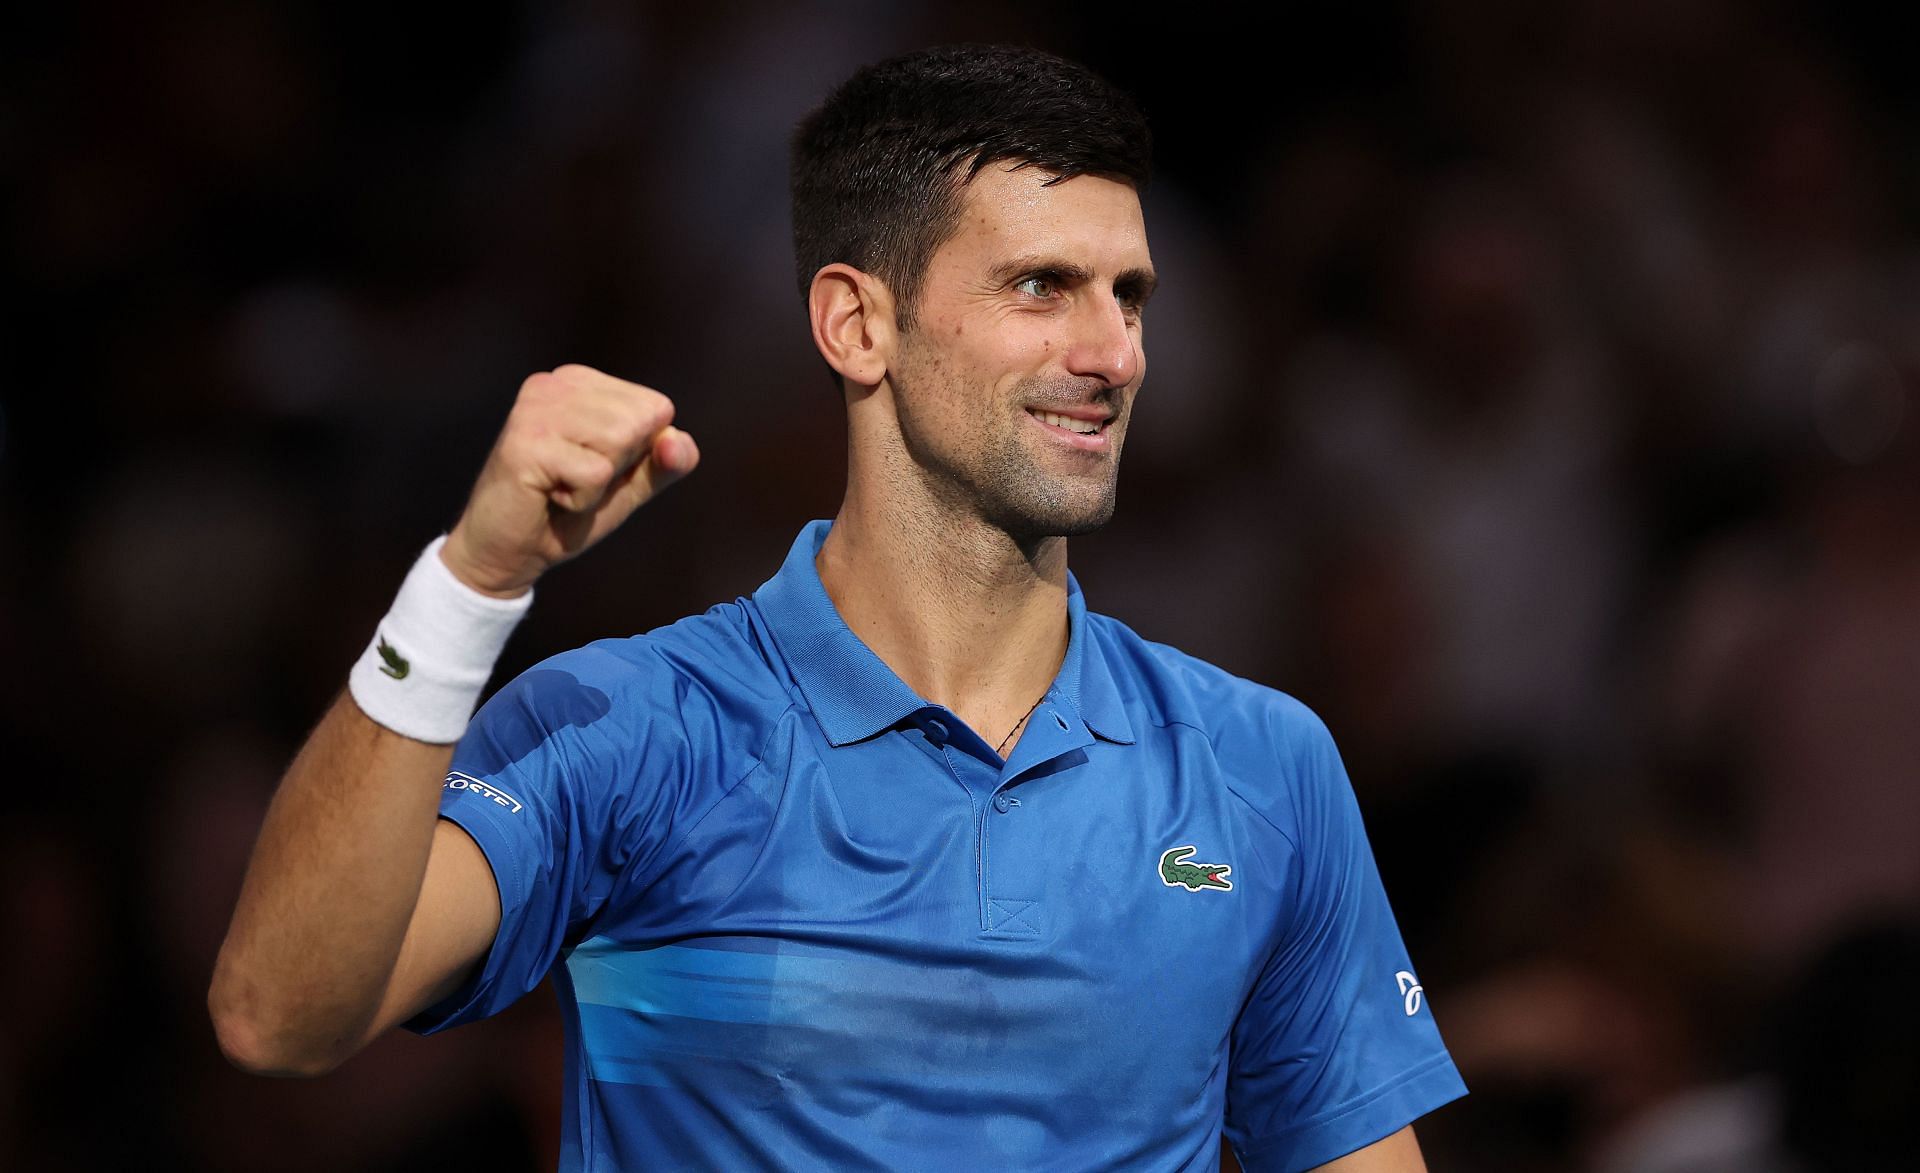 Novak Djokovic has qualified for the 2022 ATP Tour Finals using a provision in the rulebook